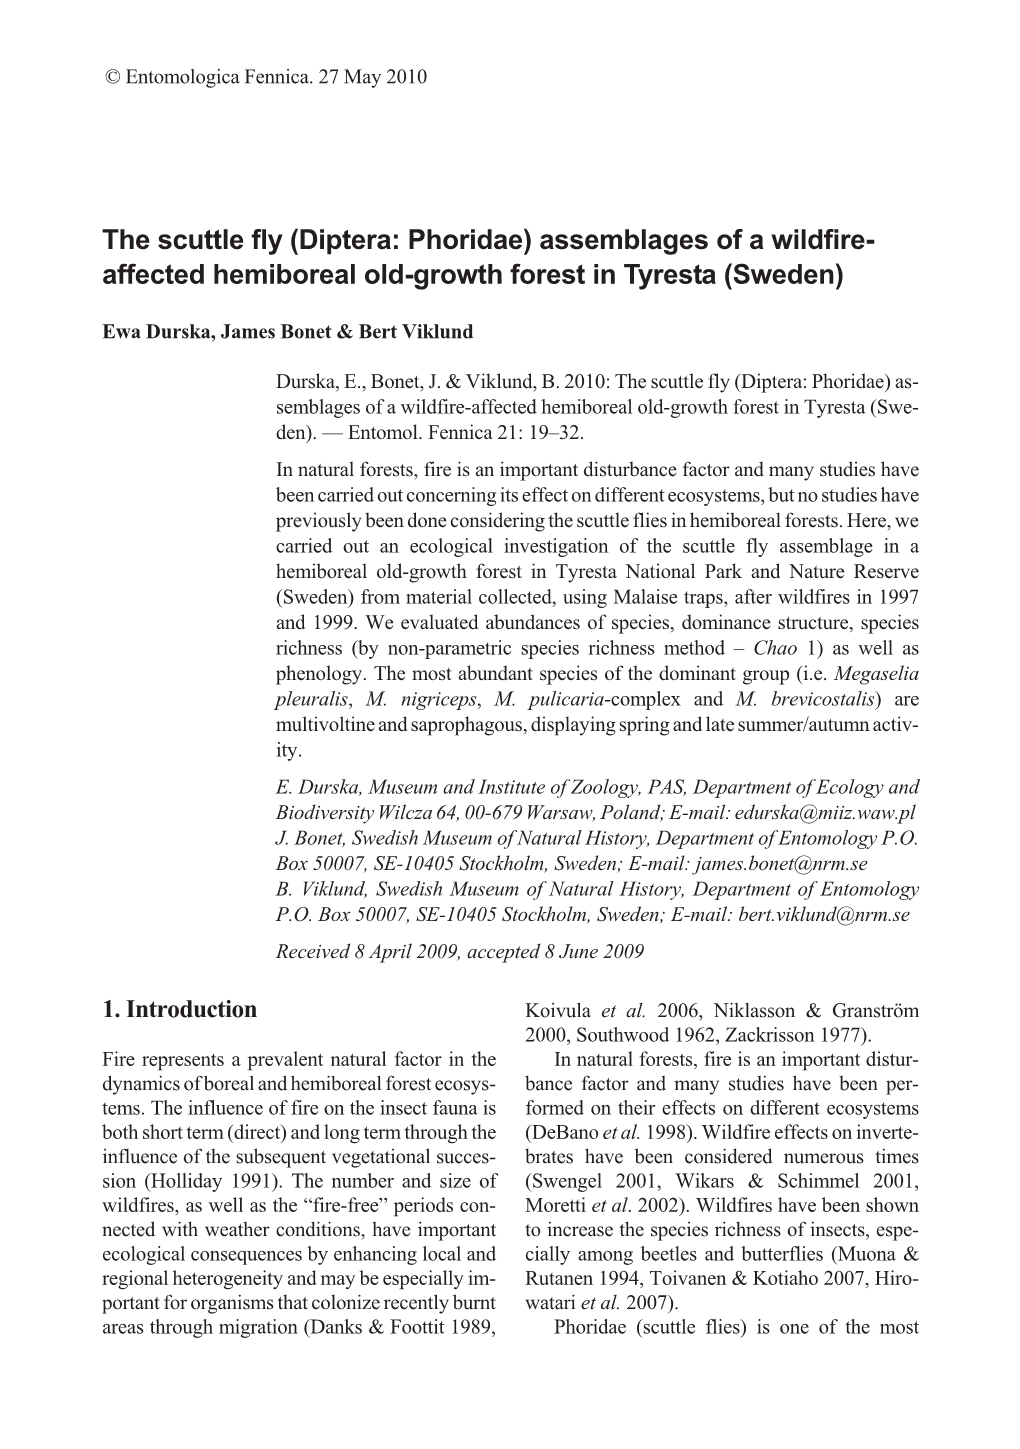 The Scuttle Fly (Diptera: Phoridae) Assemblages of a Wildfire- Affected Hemiboreal Old-Growth Forest in Tyresta (Sweden)